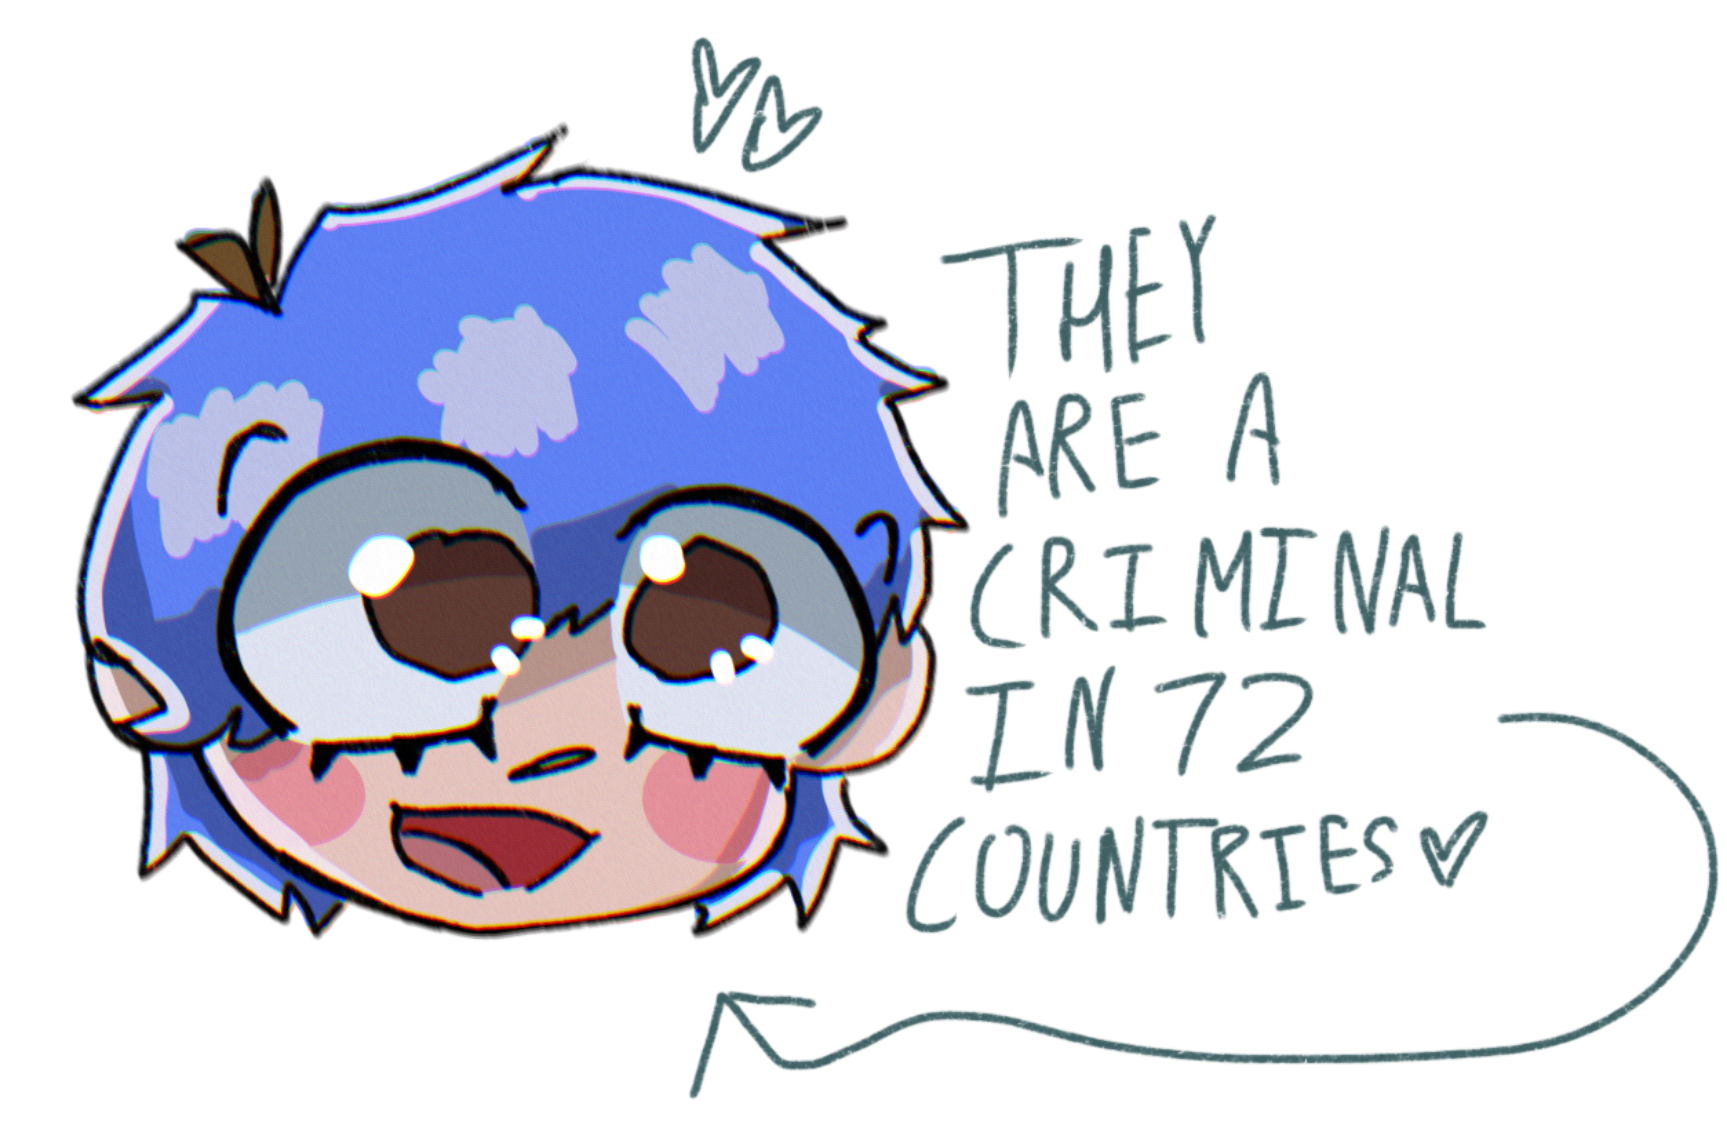 they are a criminal in 72 countries Blank Meme Template